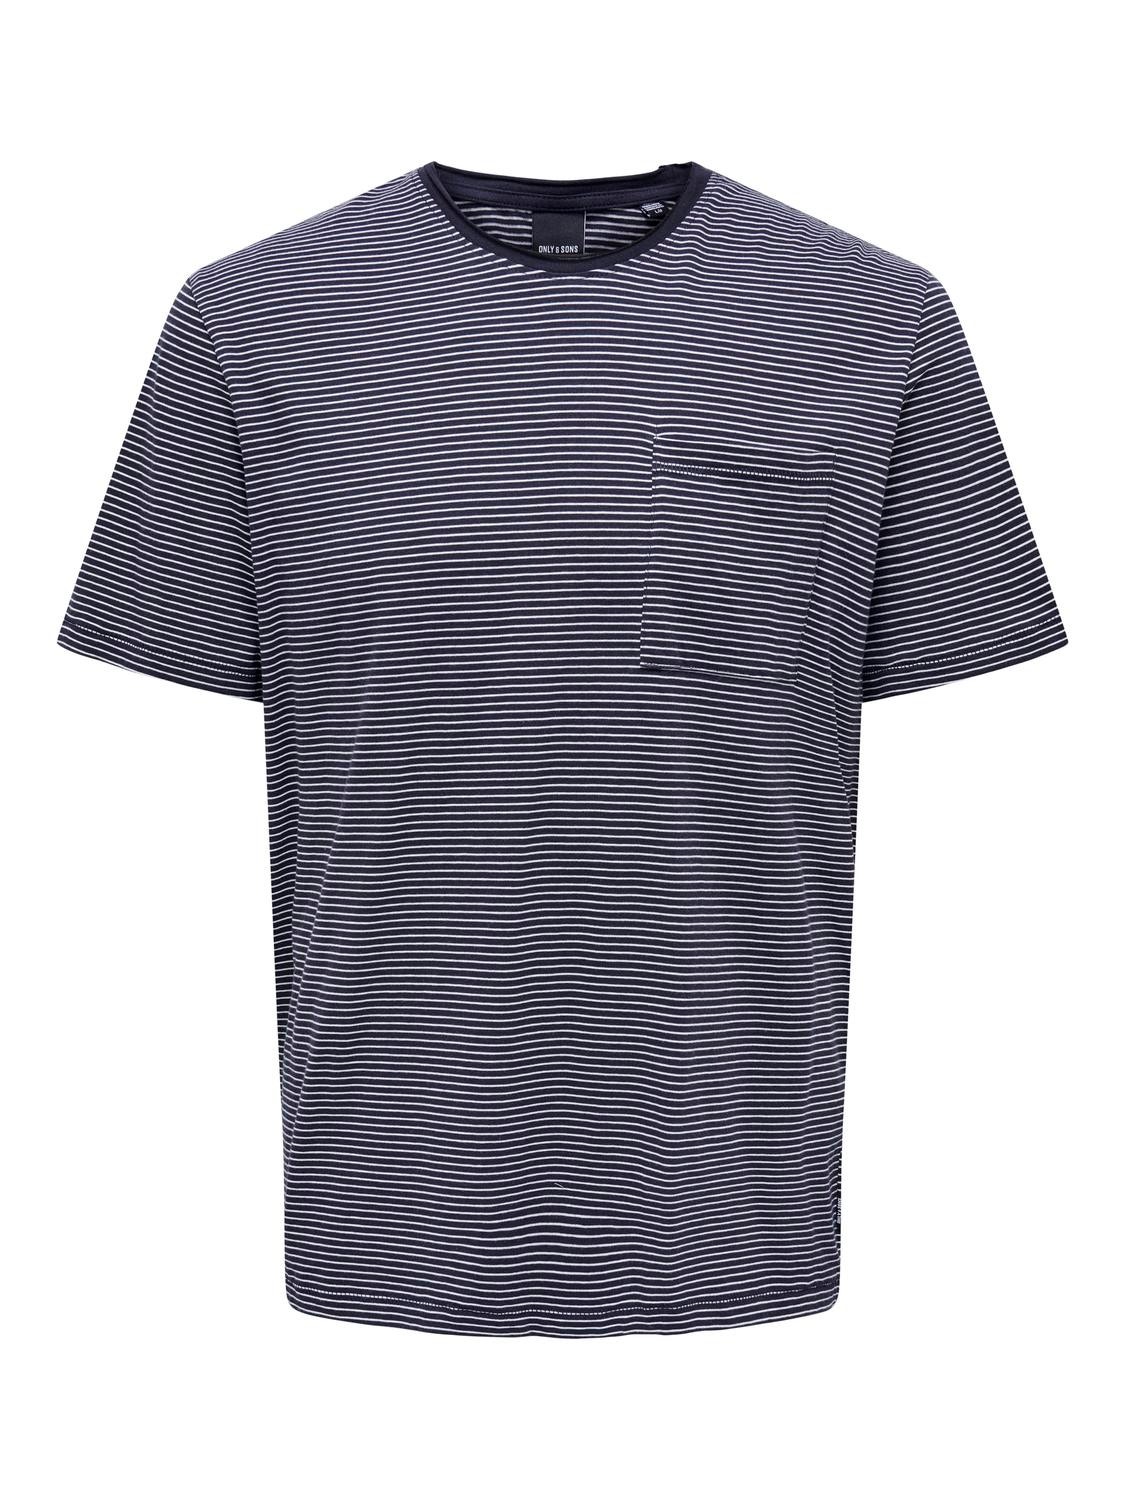 ONLY & SONS Striped o-neck t-shirt with chest pocket -Dark Navy - 22025680